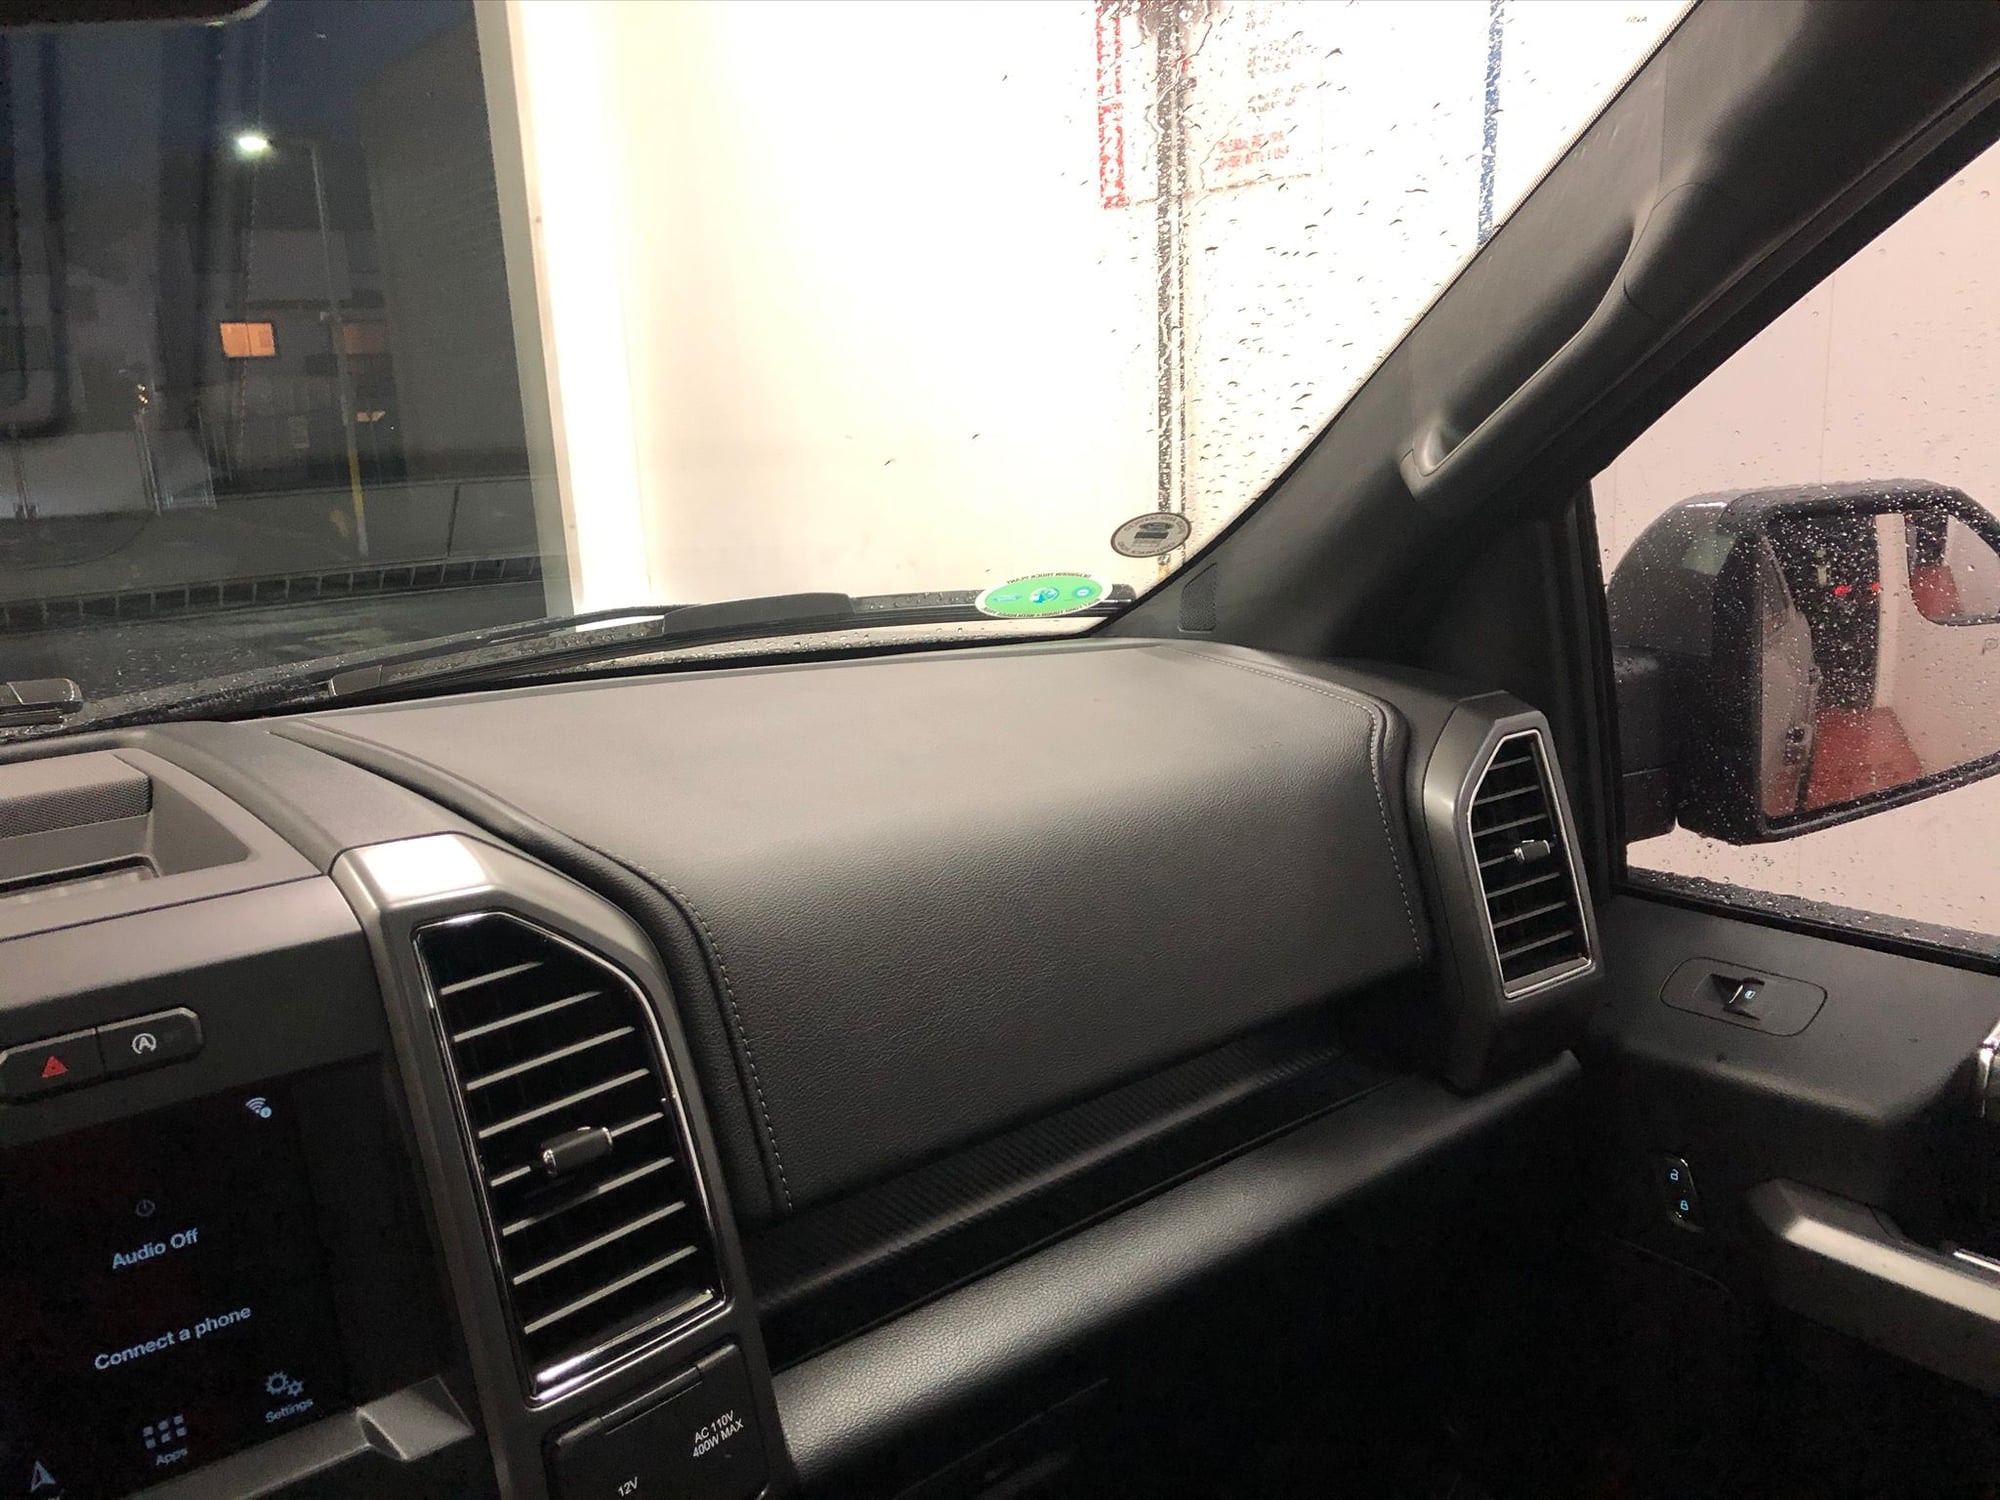 2019 F150 dash warpage at defrost grill. Dash skin replacement